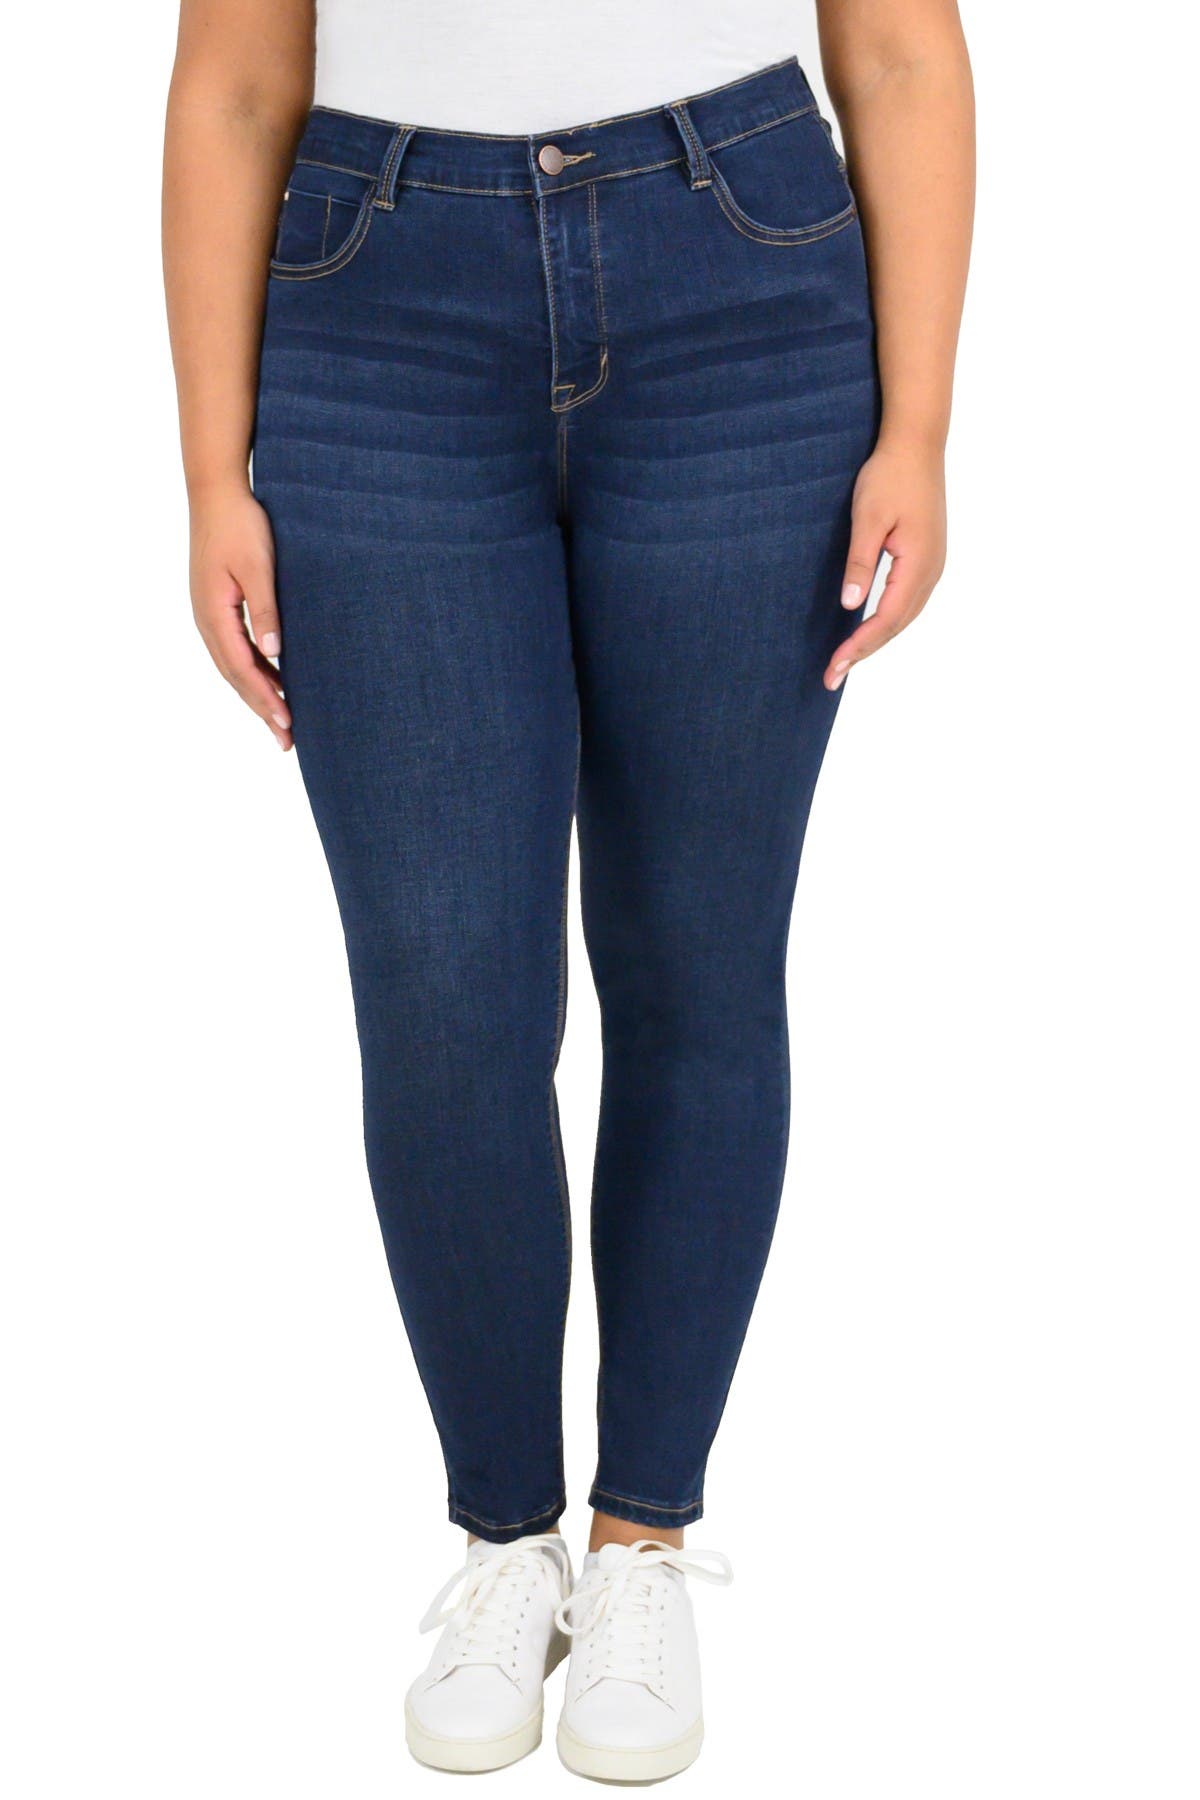 Curve Appeal | Essential Skinny Jeans 